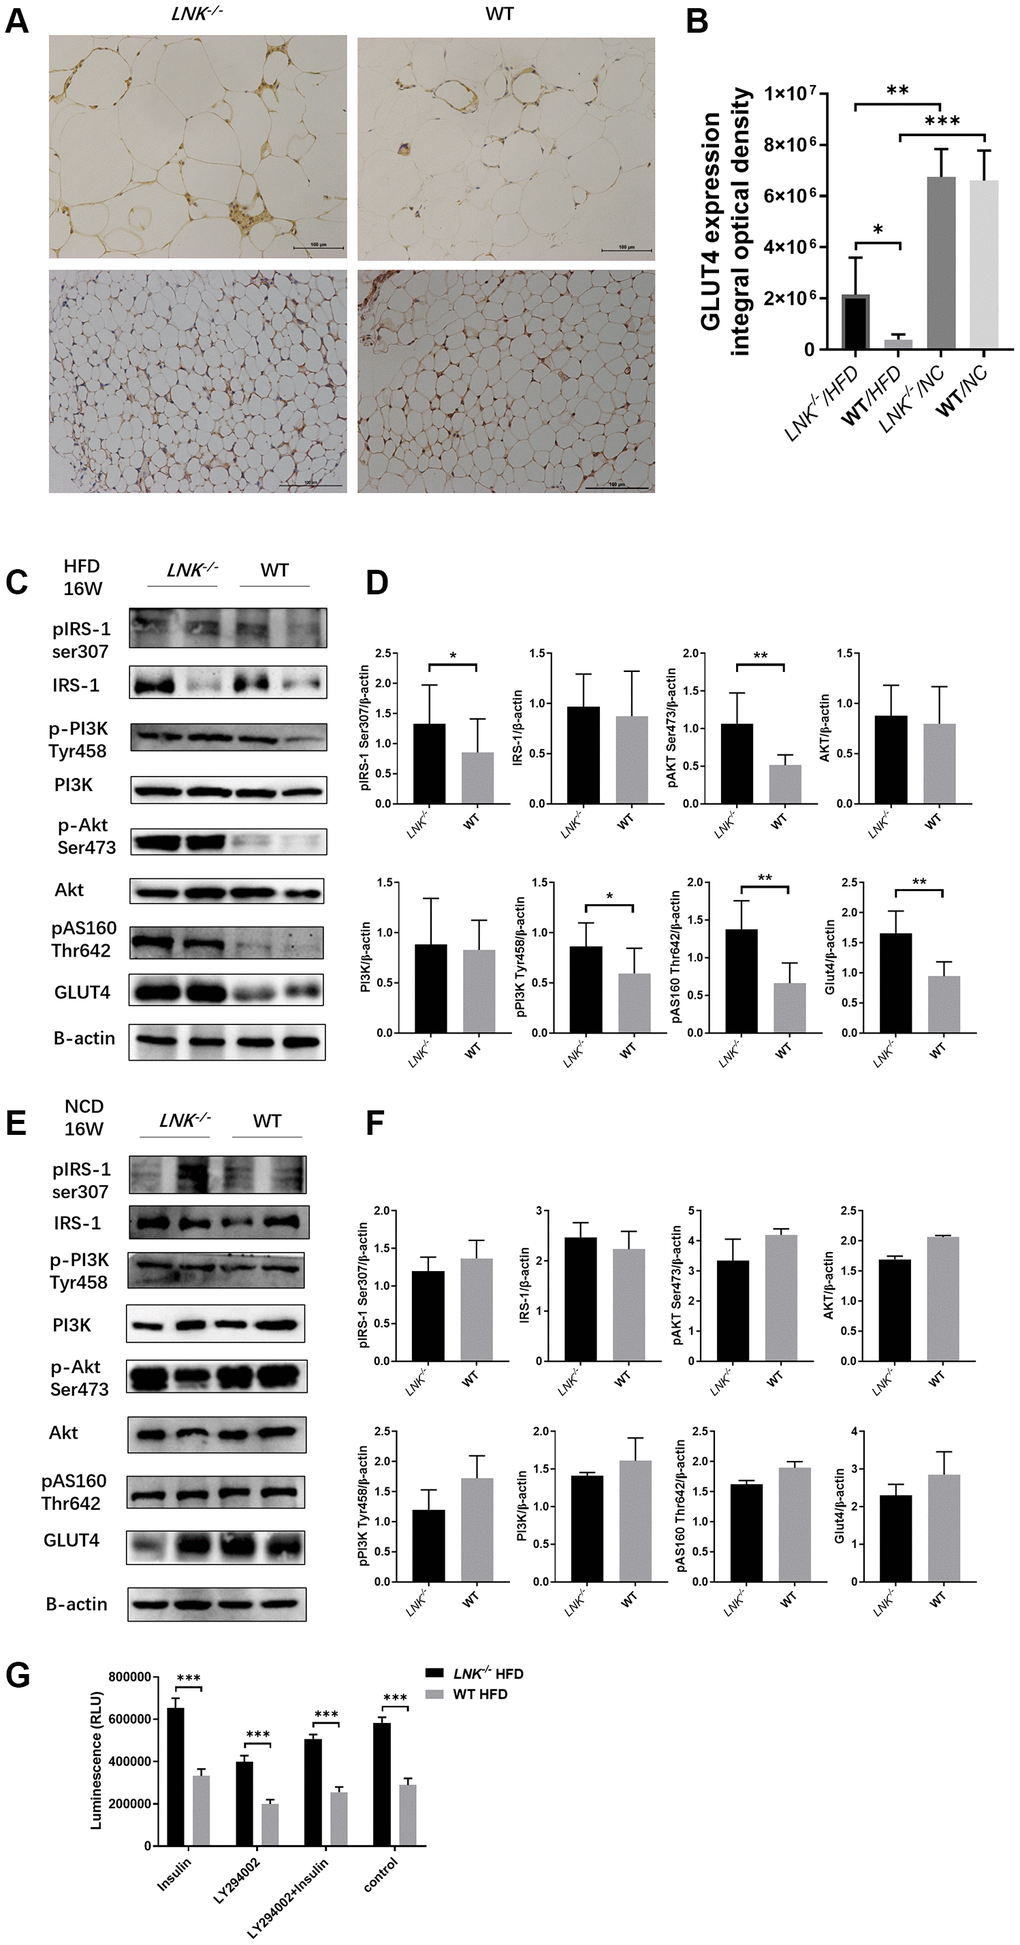 LNK deficiency altered insulin signaling and the expression of GLUT-4 protein in adipose tissues in obesity-induced insulin resistance model. (A, B) Representative images of immunohistochemical stain of GLUT4 in adipose tissue were shown (HFD: LNK-/- n=7, WT n=6; NCD: LNK-/- n=6, WT n=7. Five images were quantified per mouse). (C, D) LNK impairs IRS1 serine phosphorylation, PI3K tyrosine phosphorylation, Akt serine phosphorylation and AS160 threonine phosphorylation as shown by WB in HFD-fed mice visceral adipose tissue (LNK-/- n=7, WT n=6 with three replicates. Representative images were shown). (E, F) GLUT4 expression and IRS1 serine phosphorylation, PI3K tyrosine phosphorylation, Akt serine phosphorylation and AS160 threonine phosphorylation as shown by WB in NCD-fed mice adipose tissue (LNK-/- n=6, WT n=7 with three replicates. Representative images were shown). (G) LNK deficiency improves glucose uptake in primary adipocyte from mice after HFD feeding for 16 weeks (n=6 per group). The primary adipocytes were differentiated into mature adipocytes and were then stimulated by LY294002 (50 μM) and insulin (10 μM) for 30 min or insulin (10 μM) for 30 min alone. Scale bars: 100 μm. Data were shown as mean ± SD. Statistical analysis was performed by ANOVA (B and G) and Student’s t-test (D and F). *p p p 